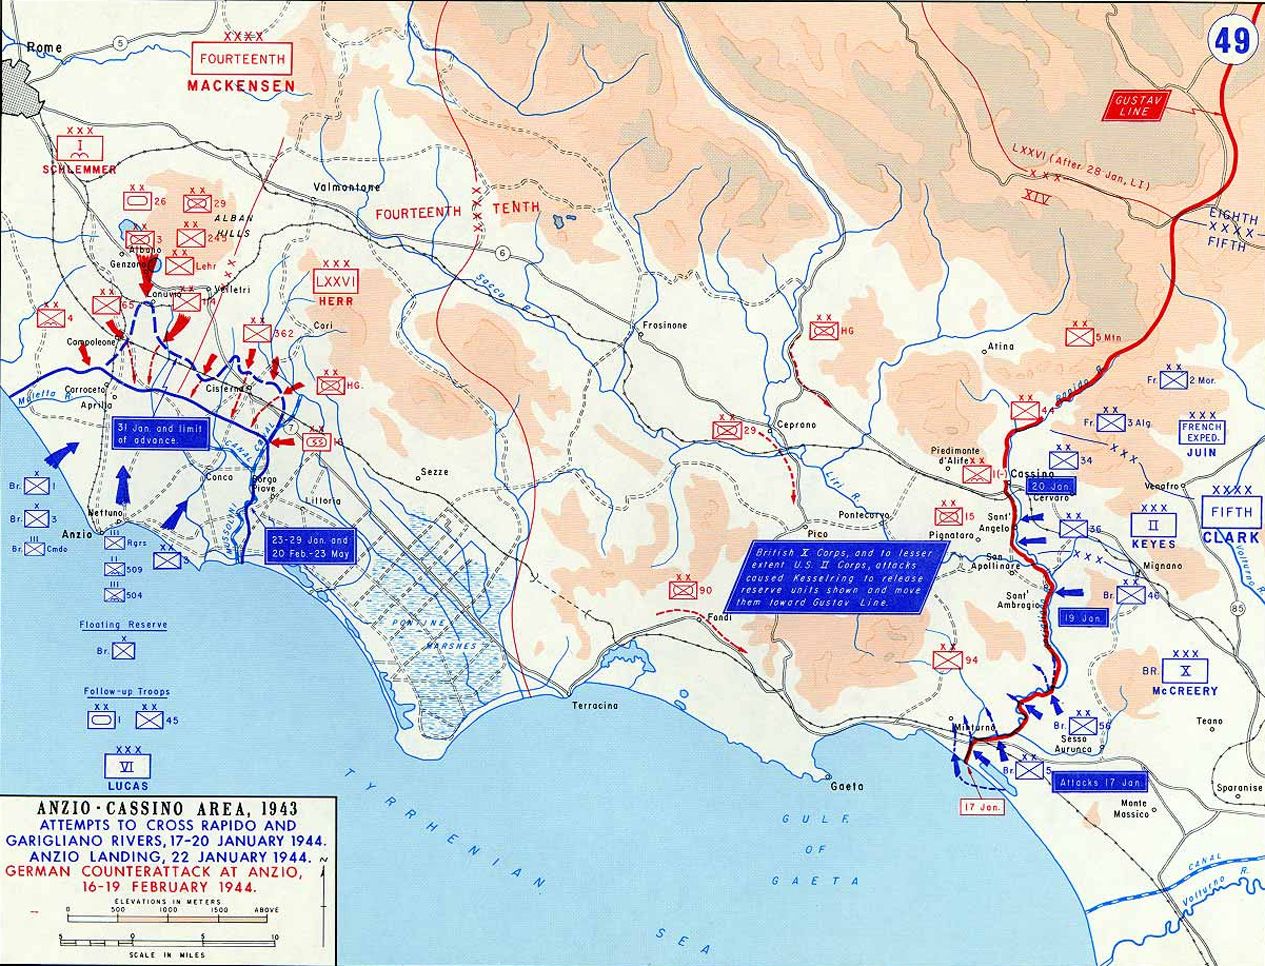 Early in 1943 the Allies landed at Anzio, well north of the Gustav Line where the Germans were blocking the Allied push north. But they were surrounded for months until breaking through as the Normandy invasion was beginning.